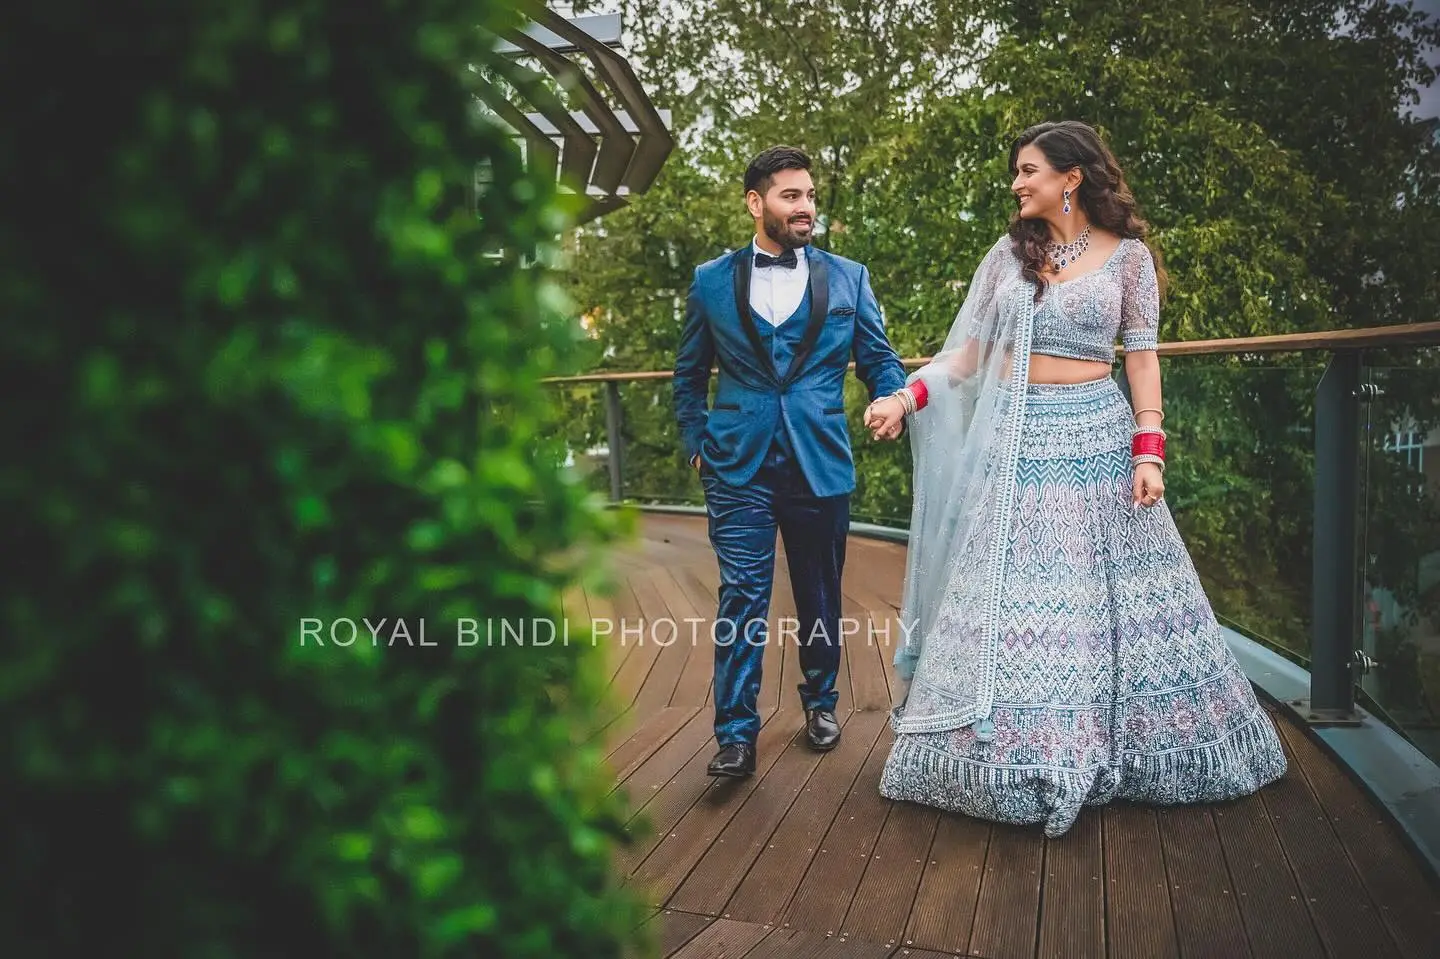 Asian Wedding Photography and Videography West Midlands